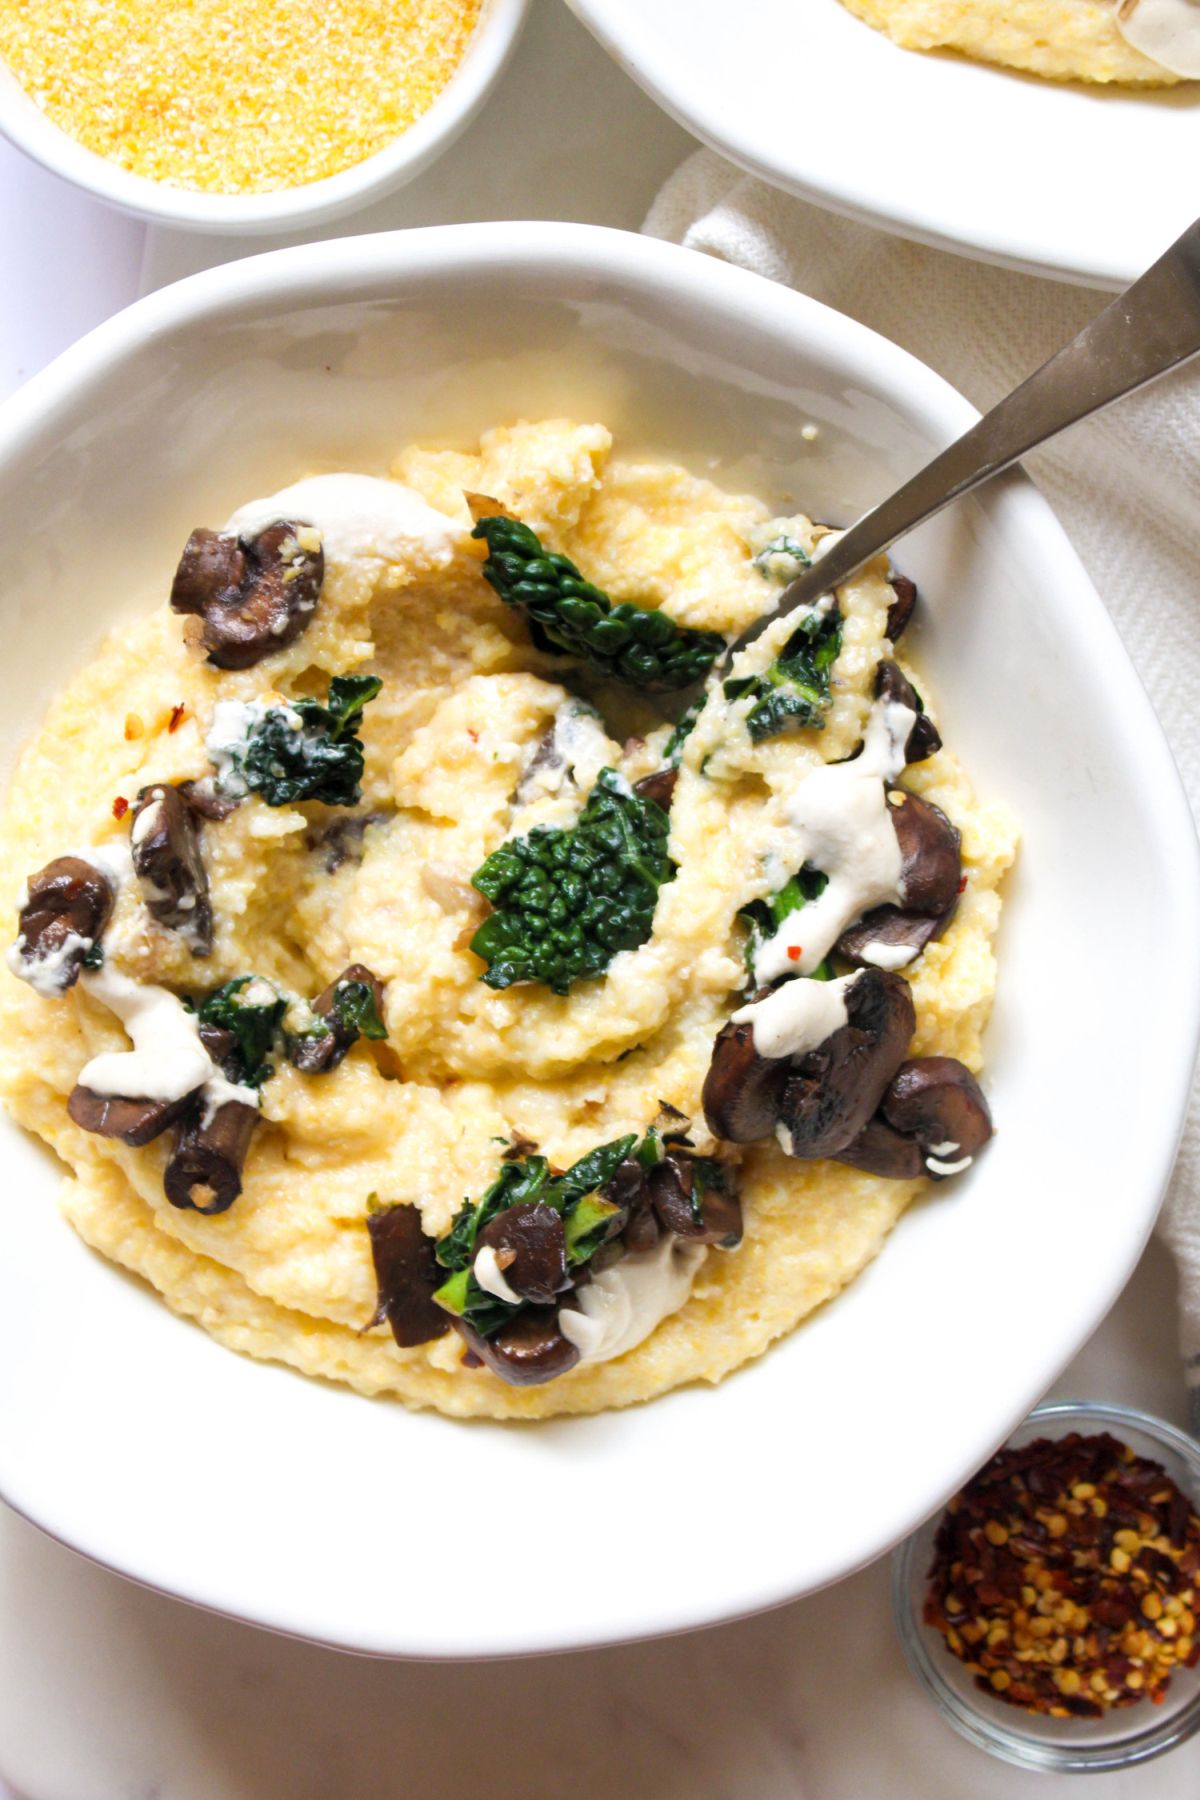 Polenta with mushroom ragout and dairy free cream sauce eating